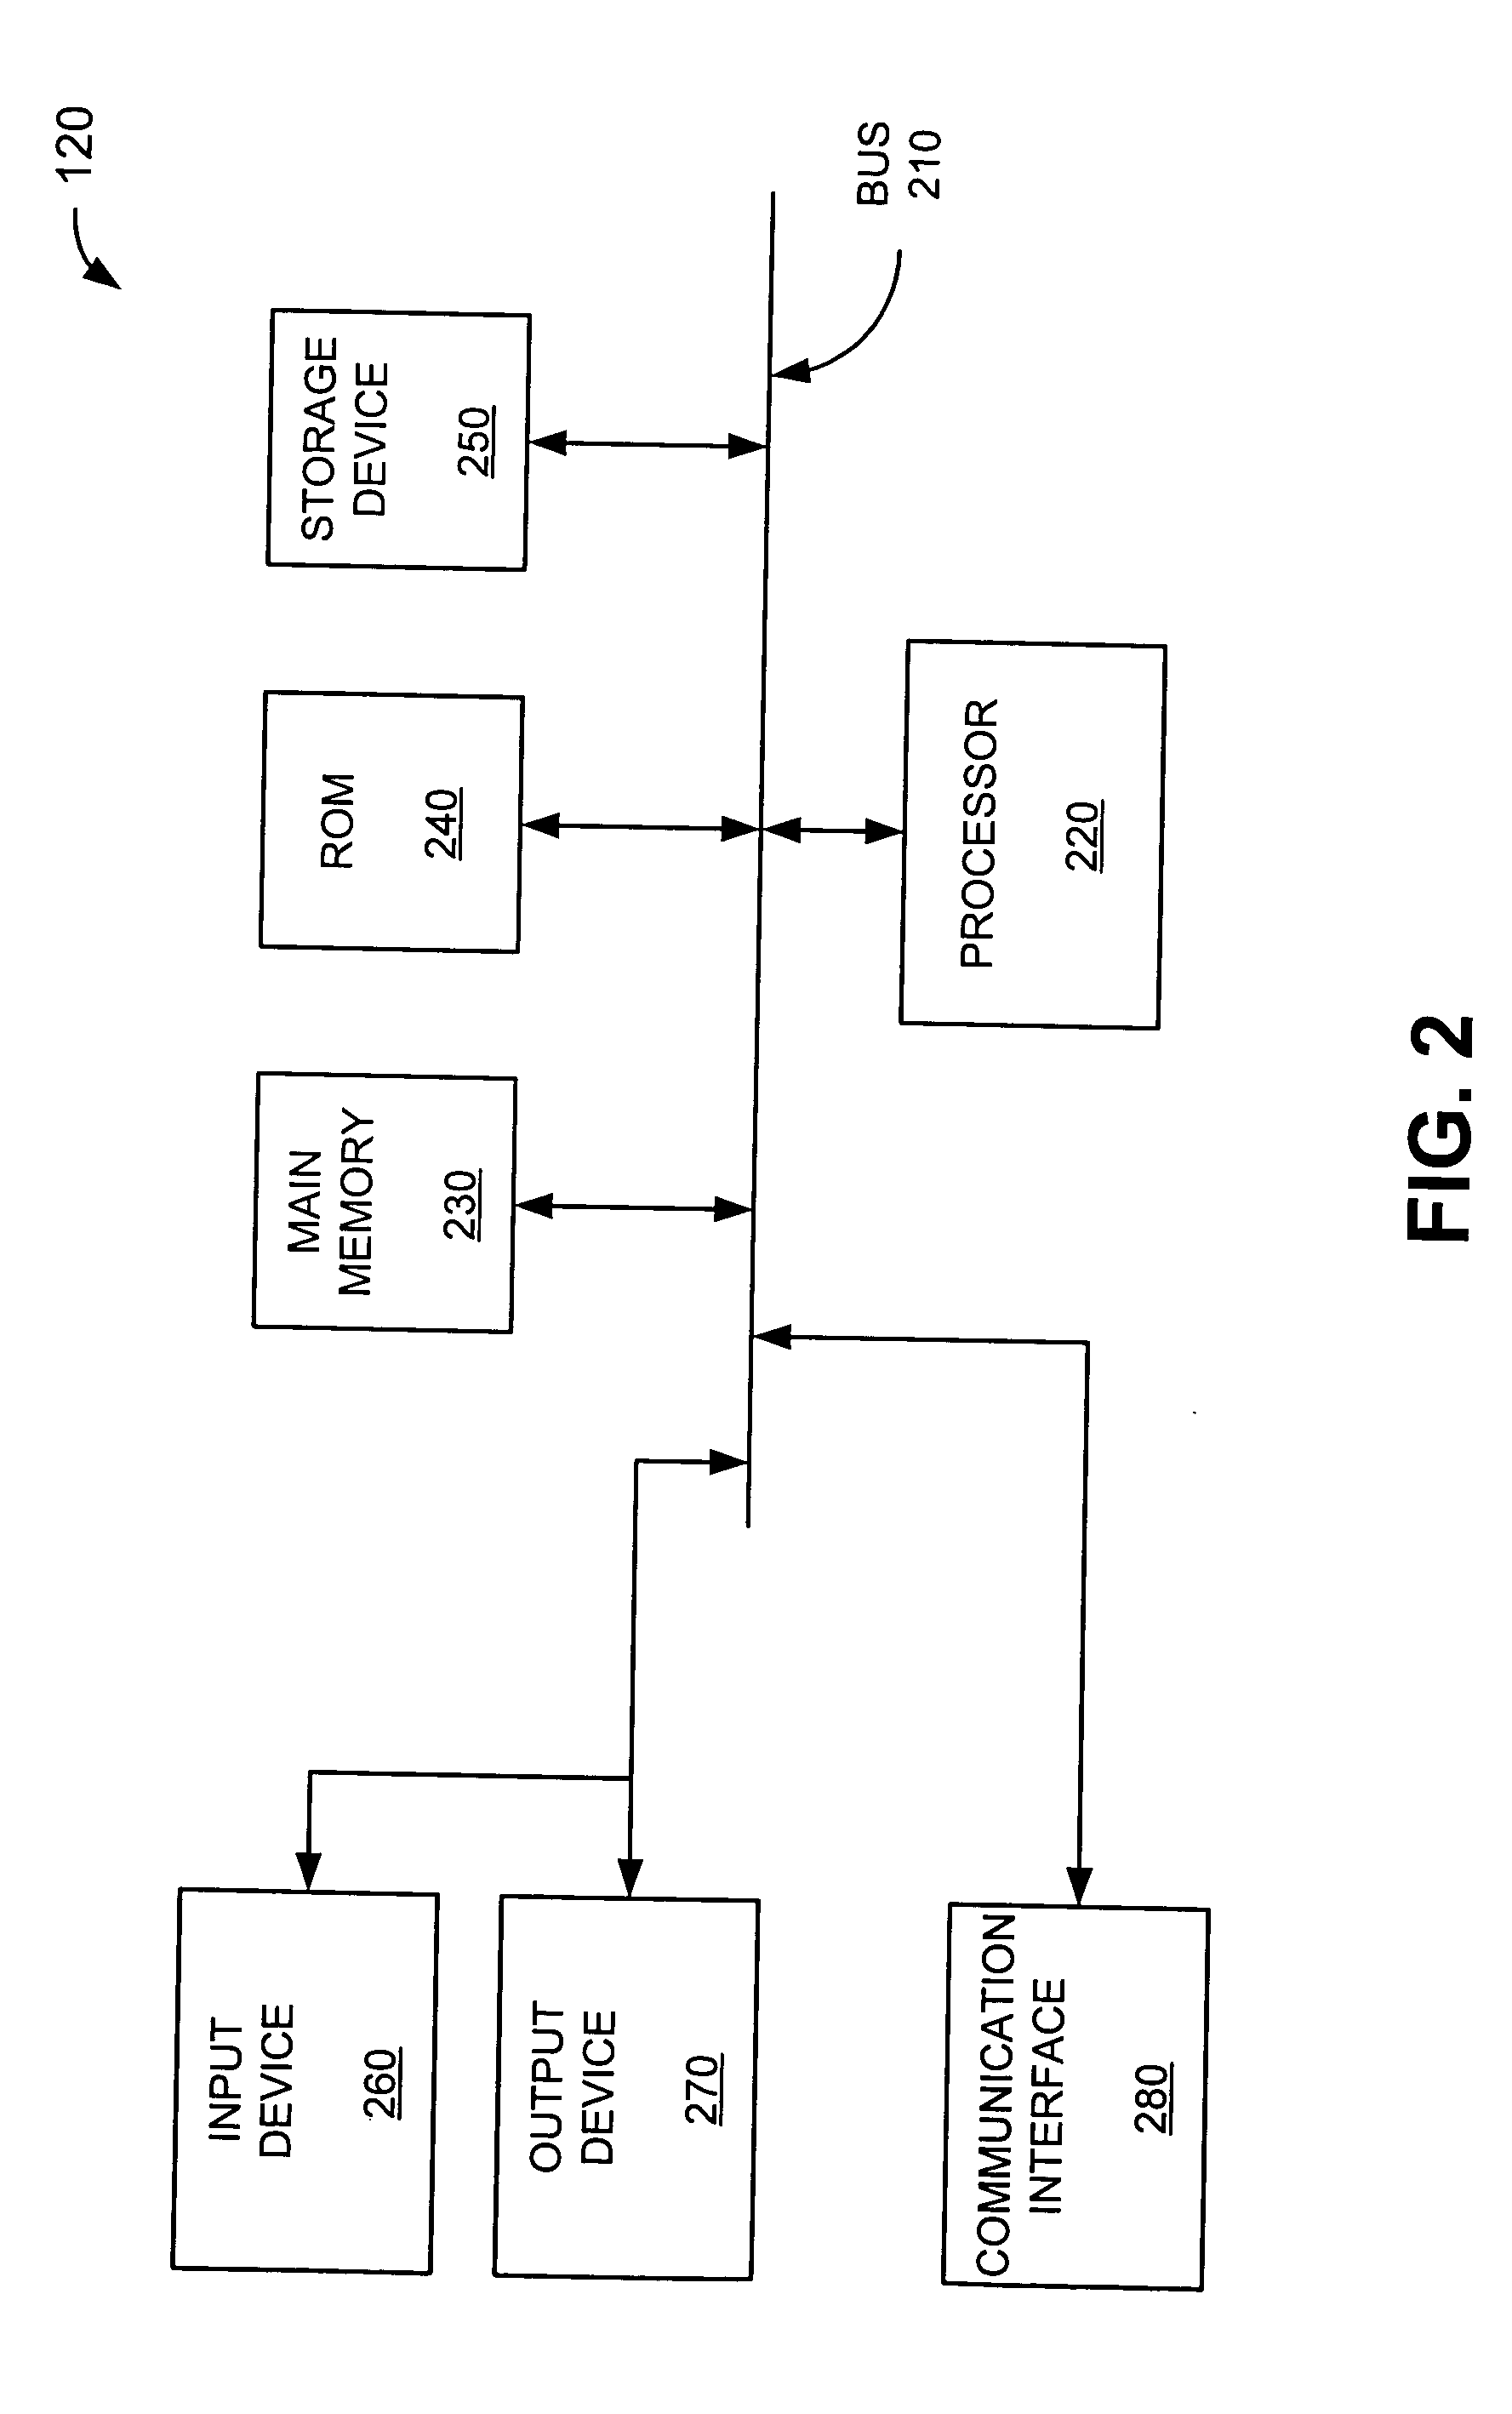 Hash-based systems and methods for detecting and preventing transmission of unwanted e-mail